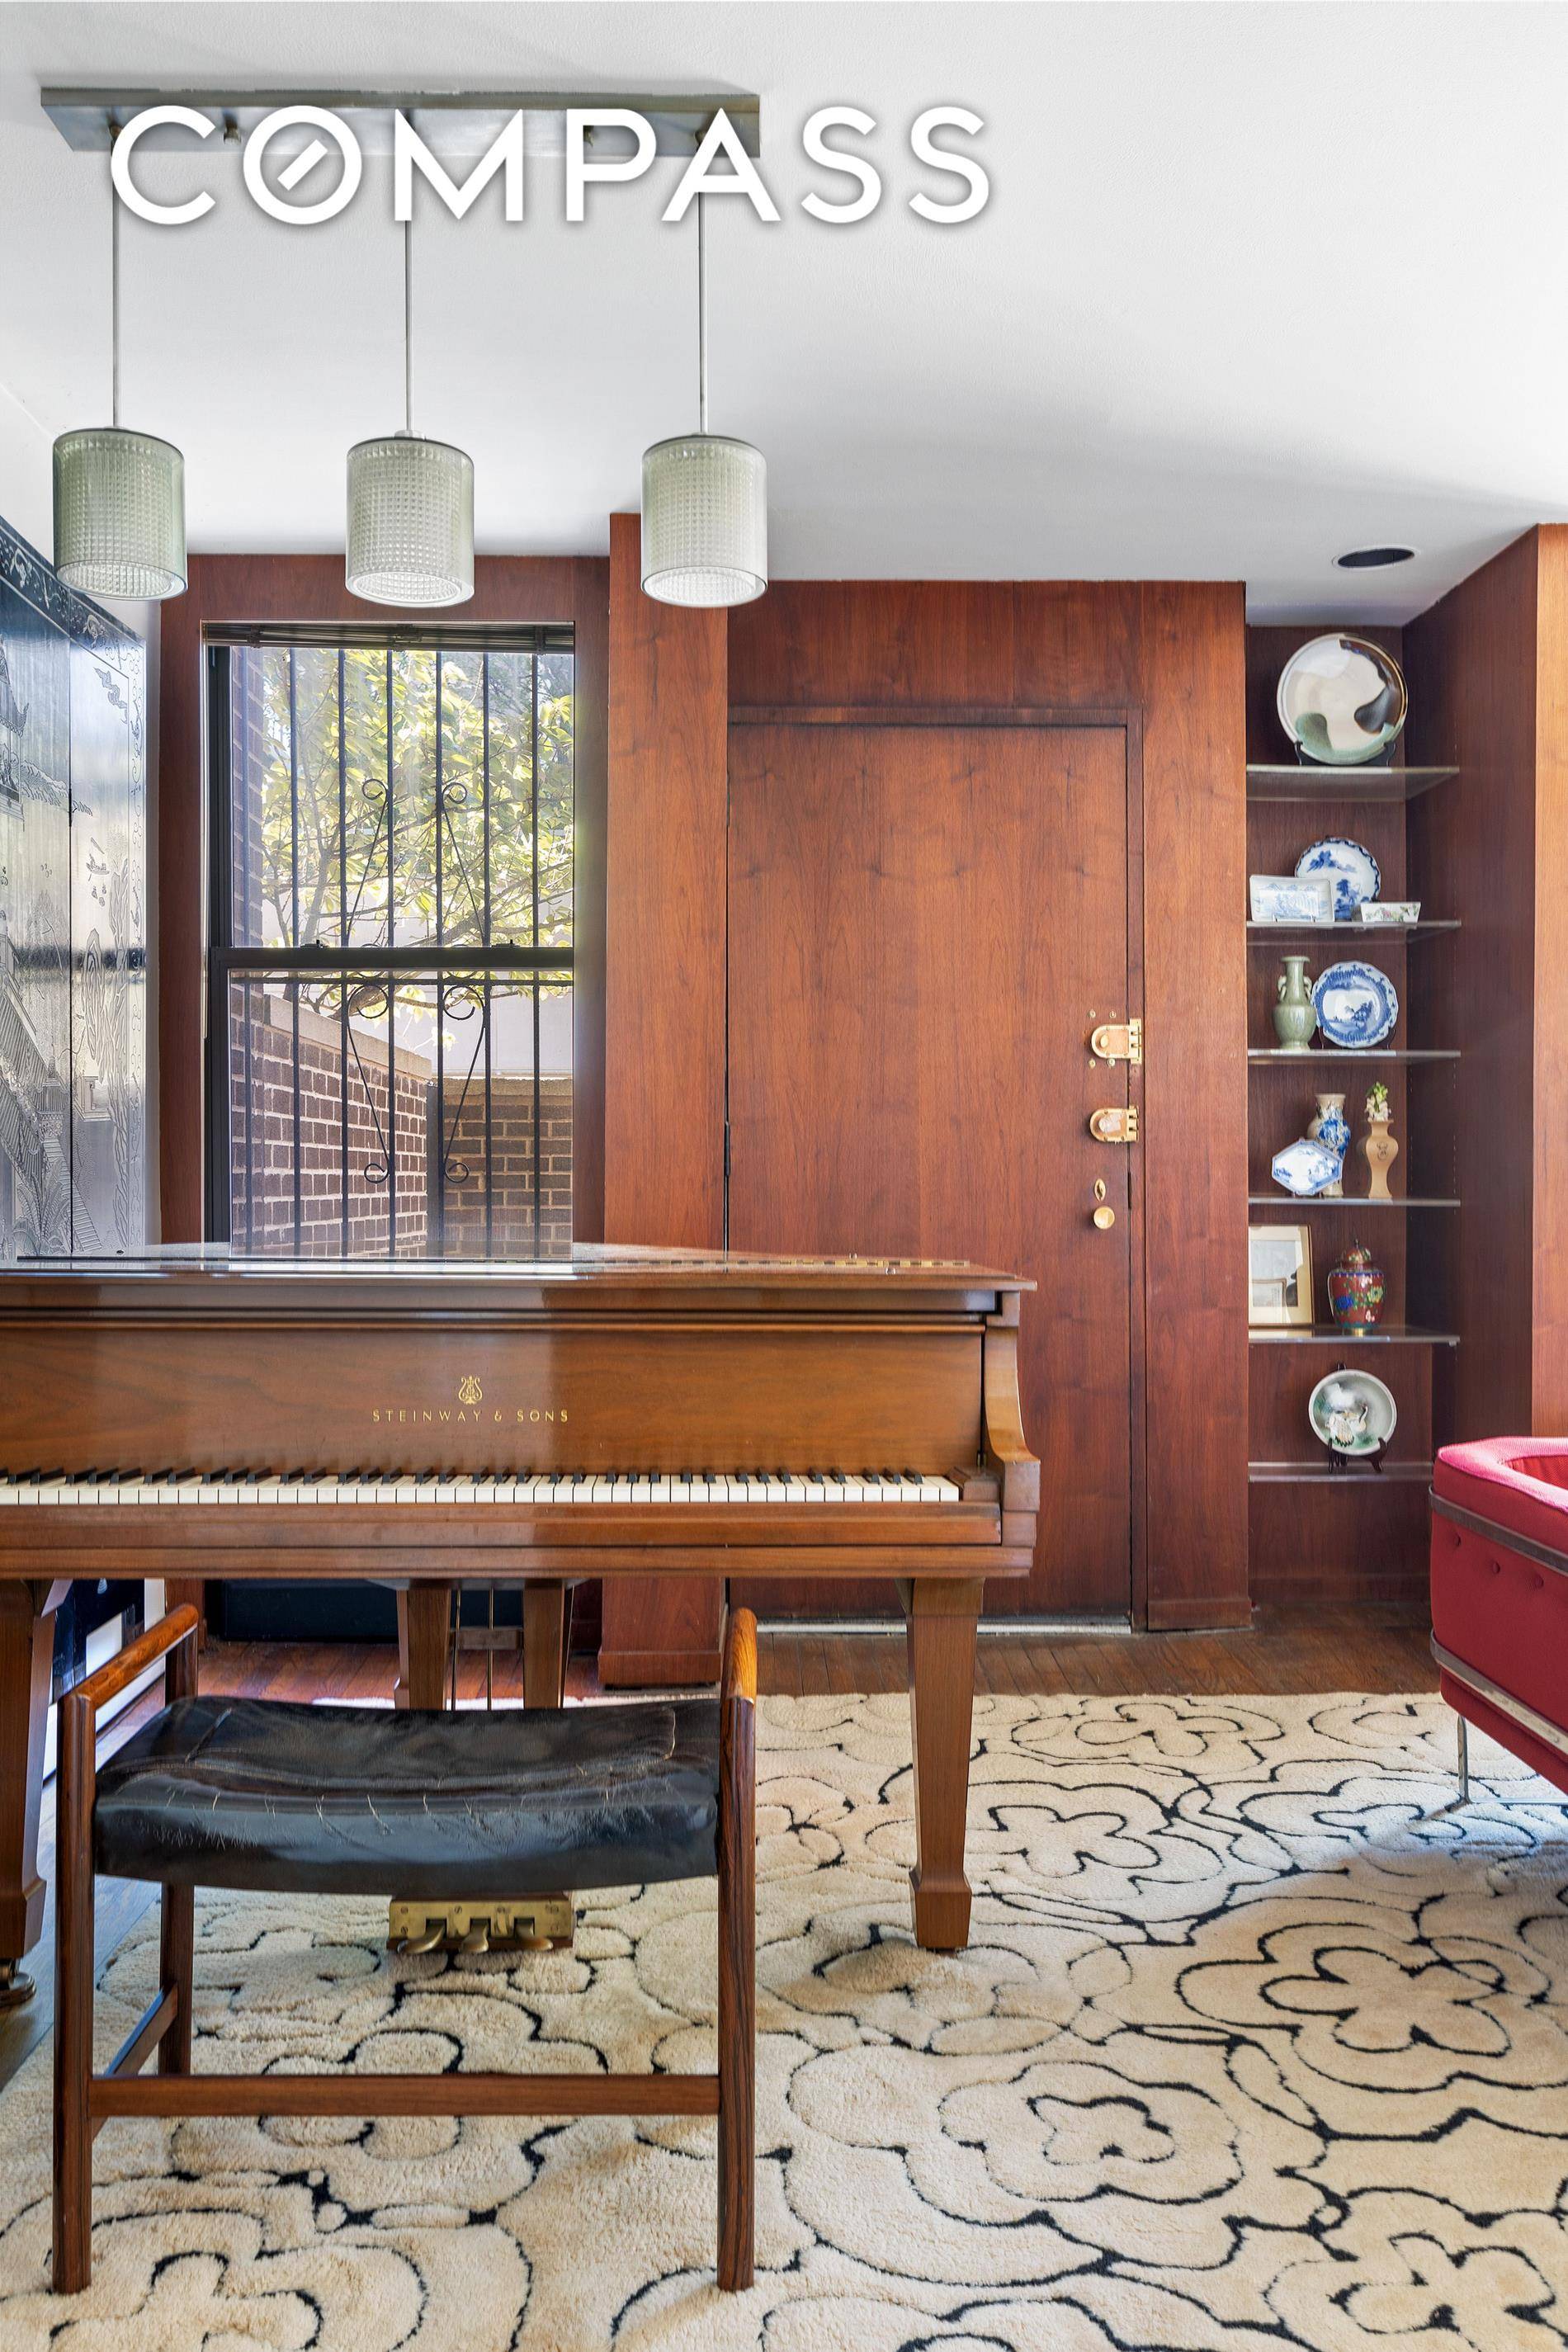 55 Henry St is a midcentury maisonette in the heart of Brooklyn Heights.